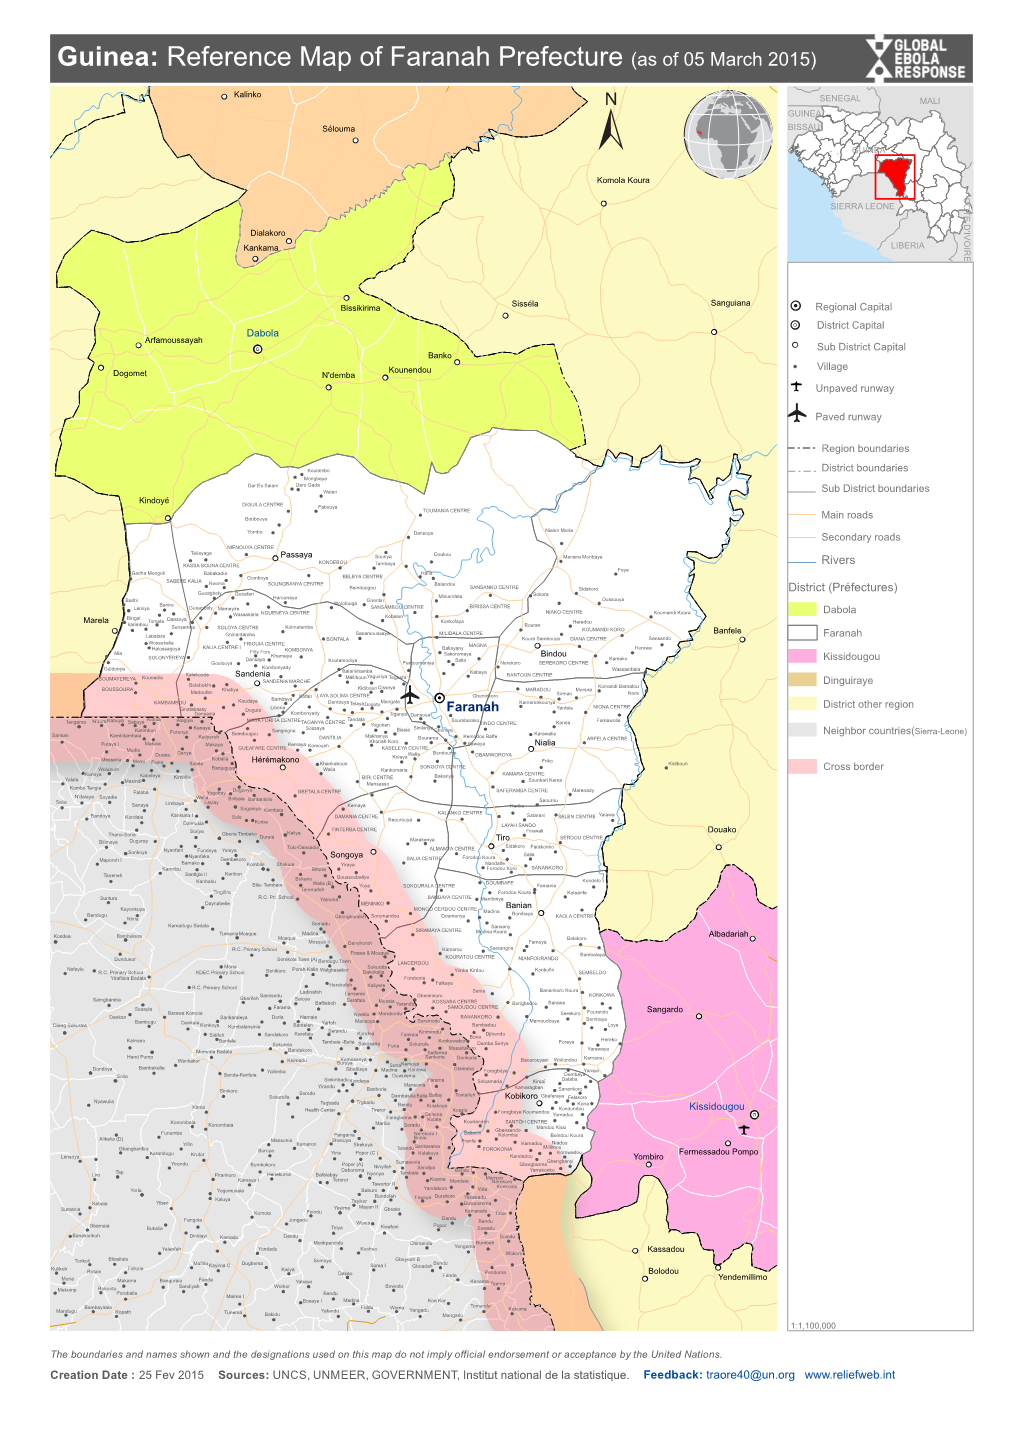 Guinea: Reference Map of Faranah Prefecture (As of 05 March 2015)